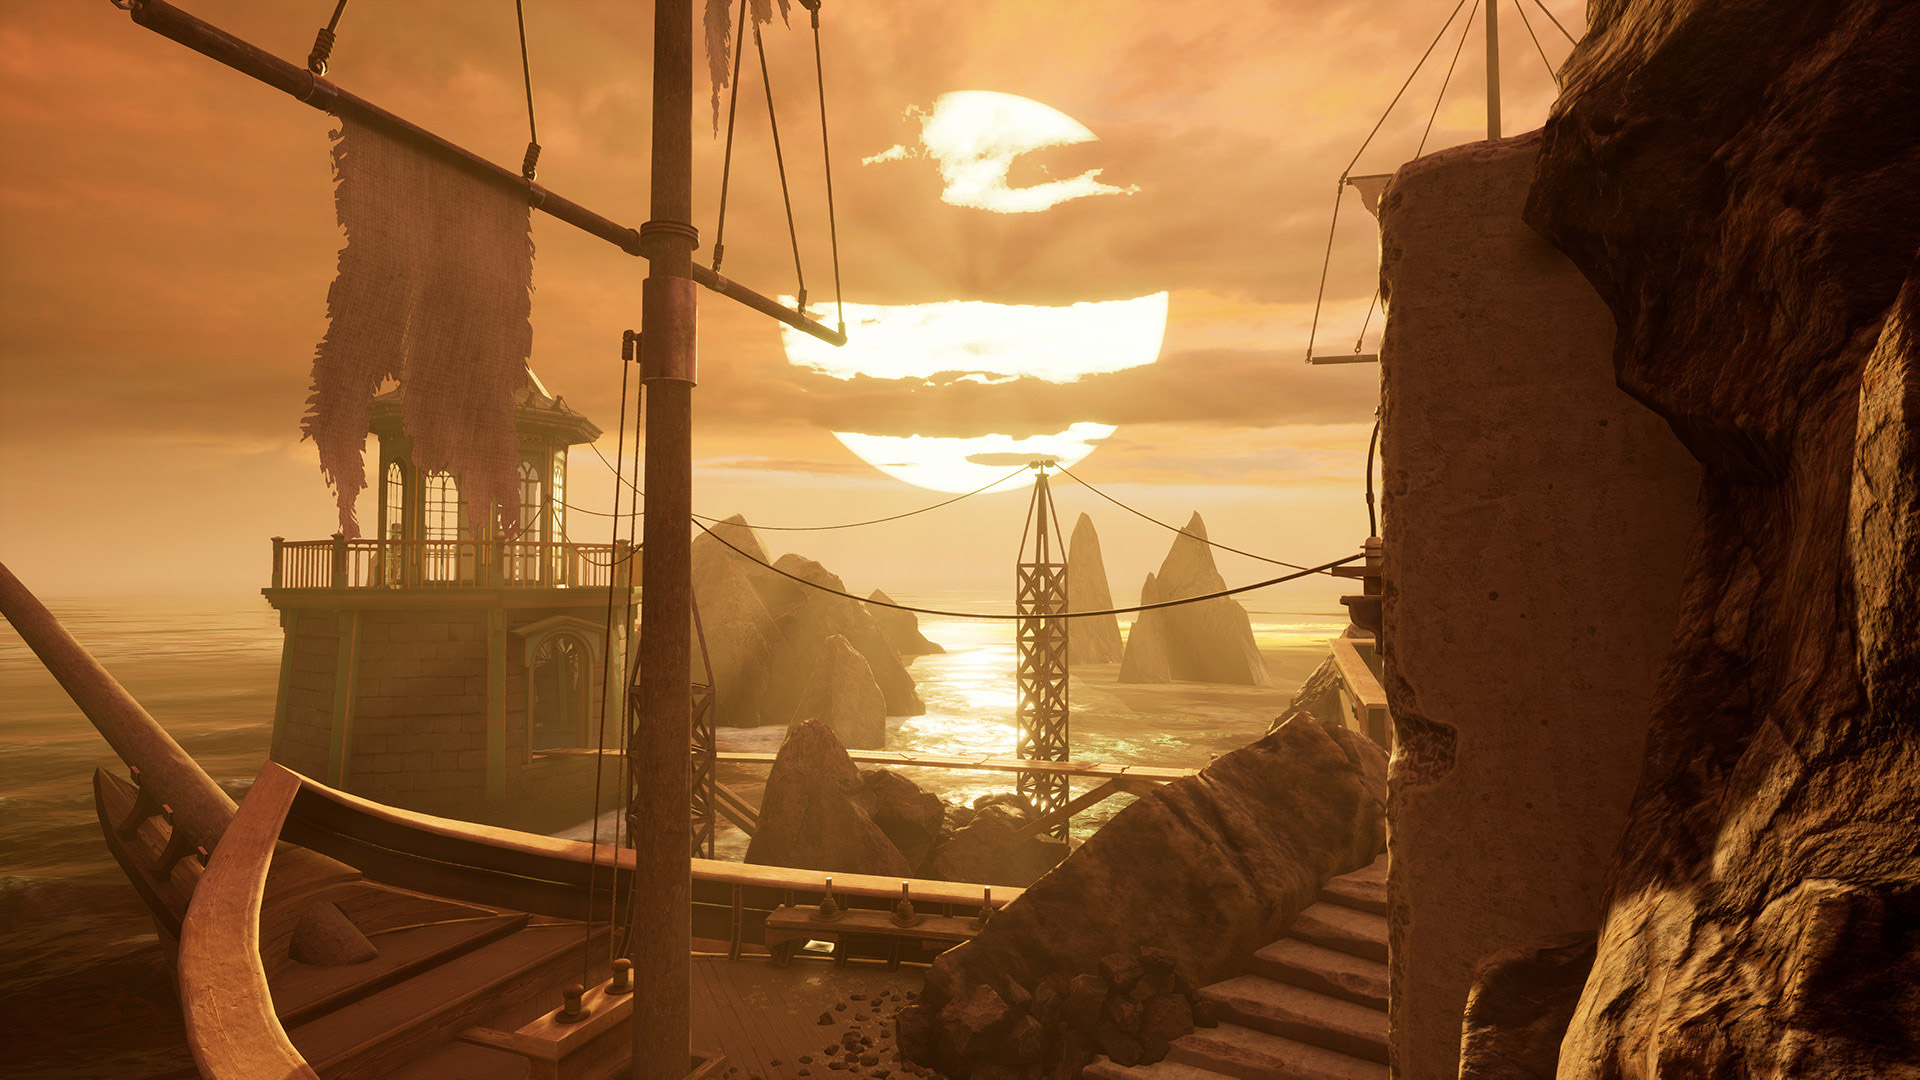 download myst vr ps4 for free